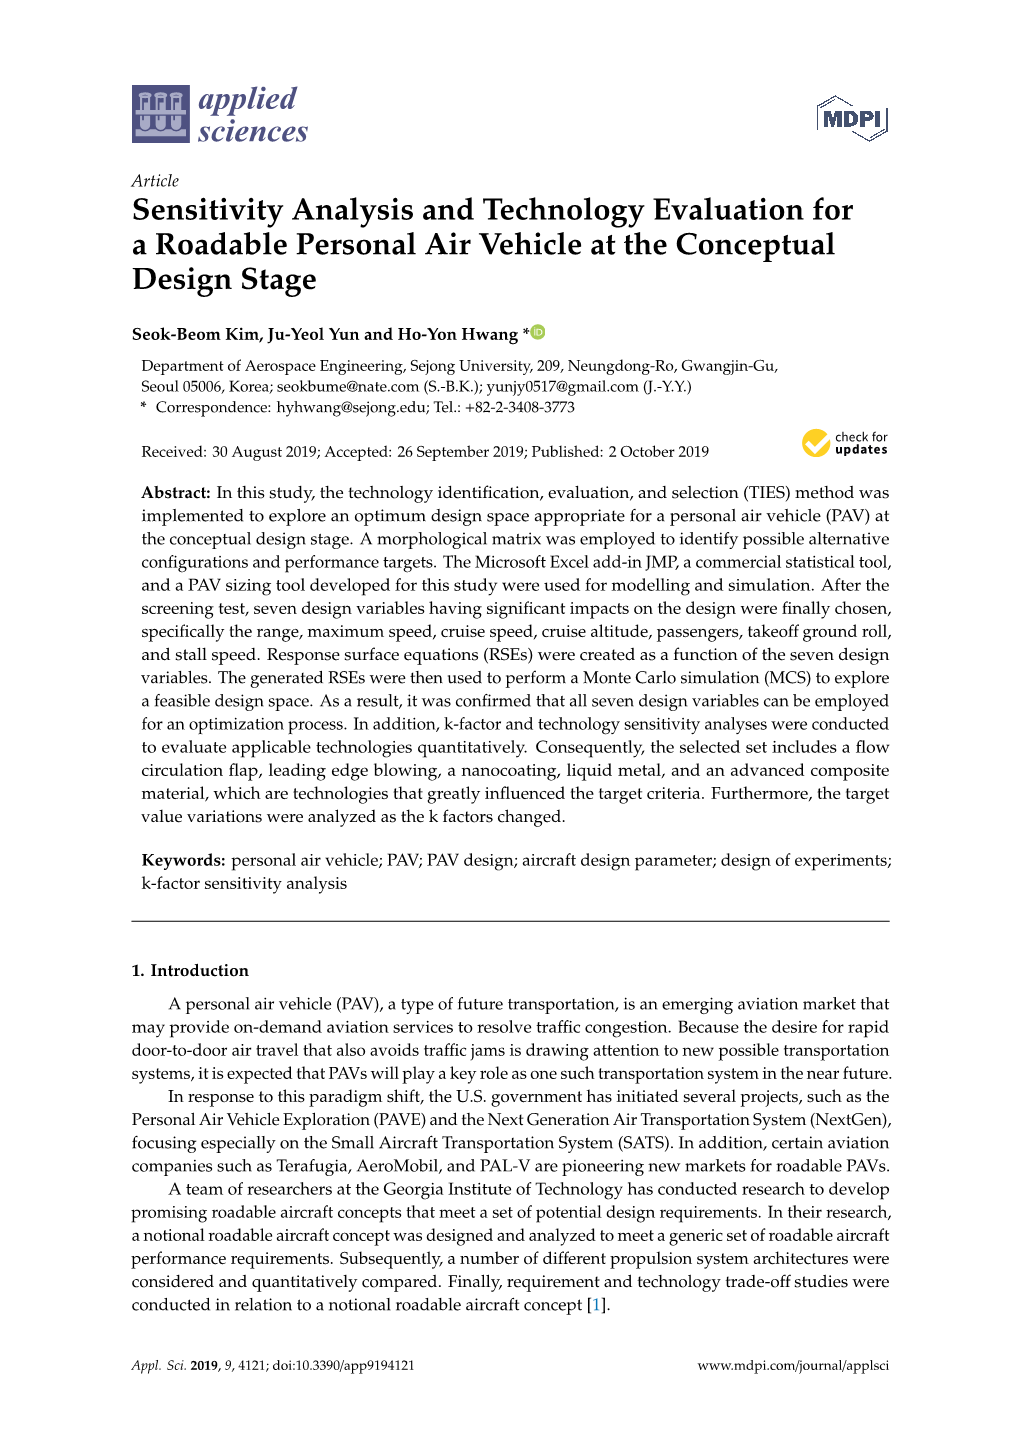 Sensitivity Analysis and Technology Evaluation for a Roadable Personal Air Vehicle at the Conceptual Design Stage